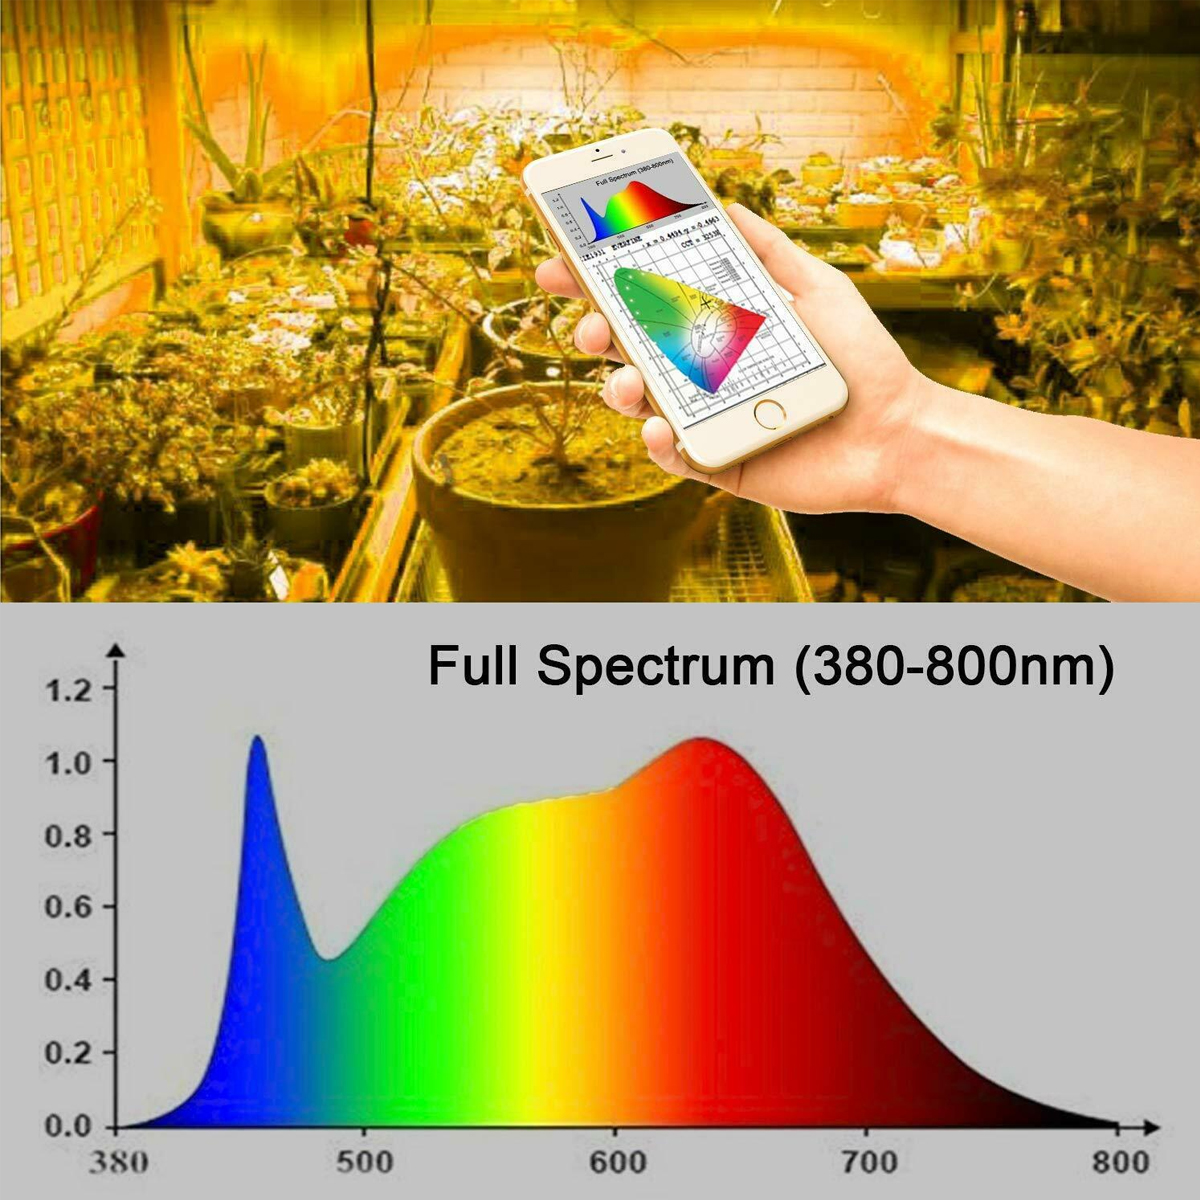 300W-LED-Grow-Light-Full-Spectrum-Hydroponic-Indoor-Plant-Flower-Growing-Bloom-Lamp-AC85-265V-1728585-9